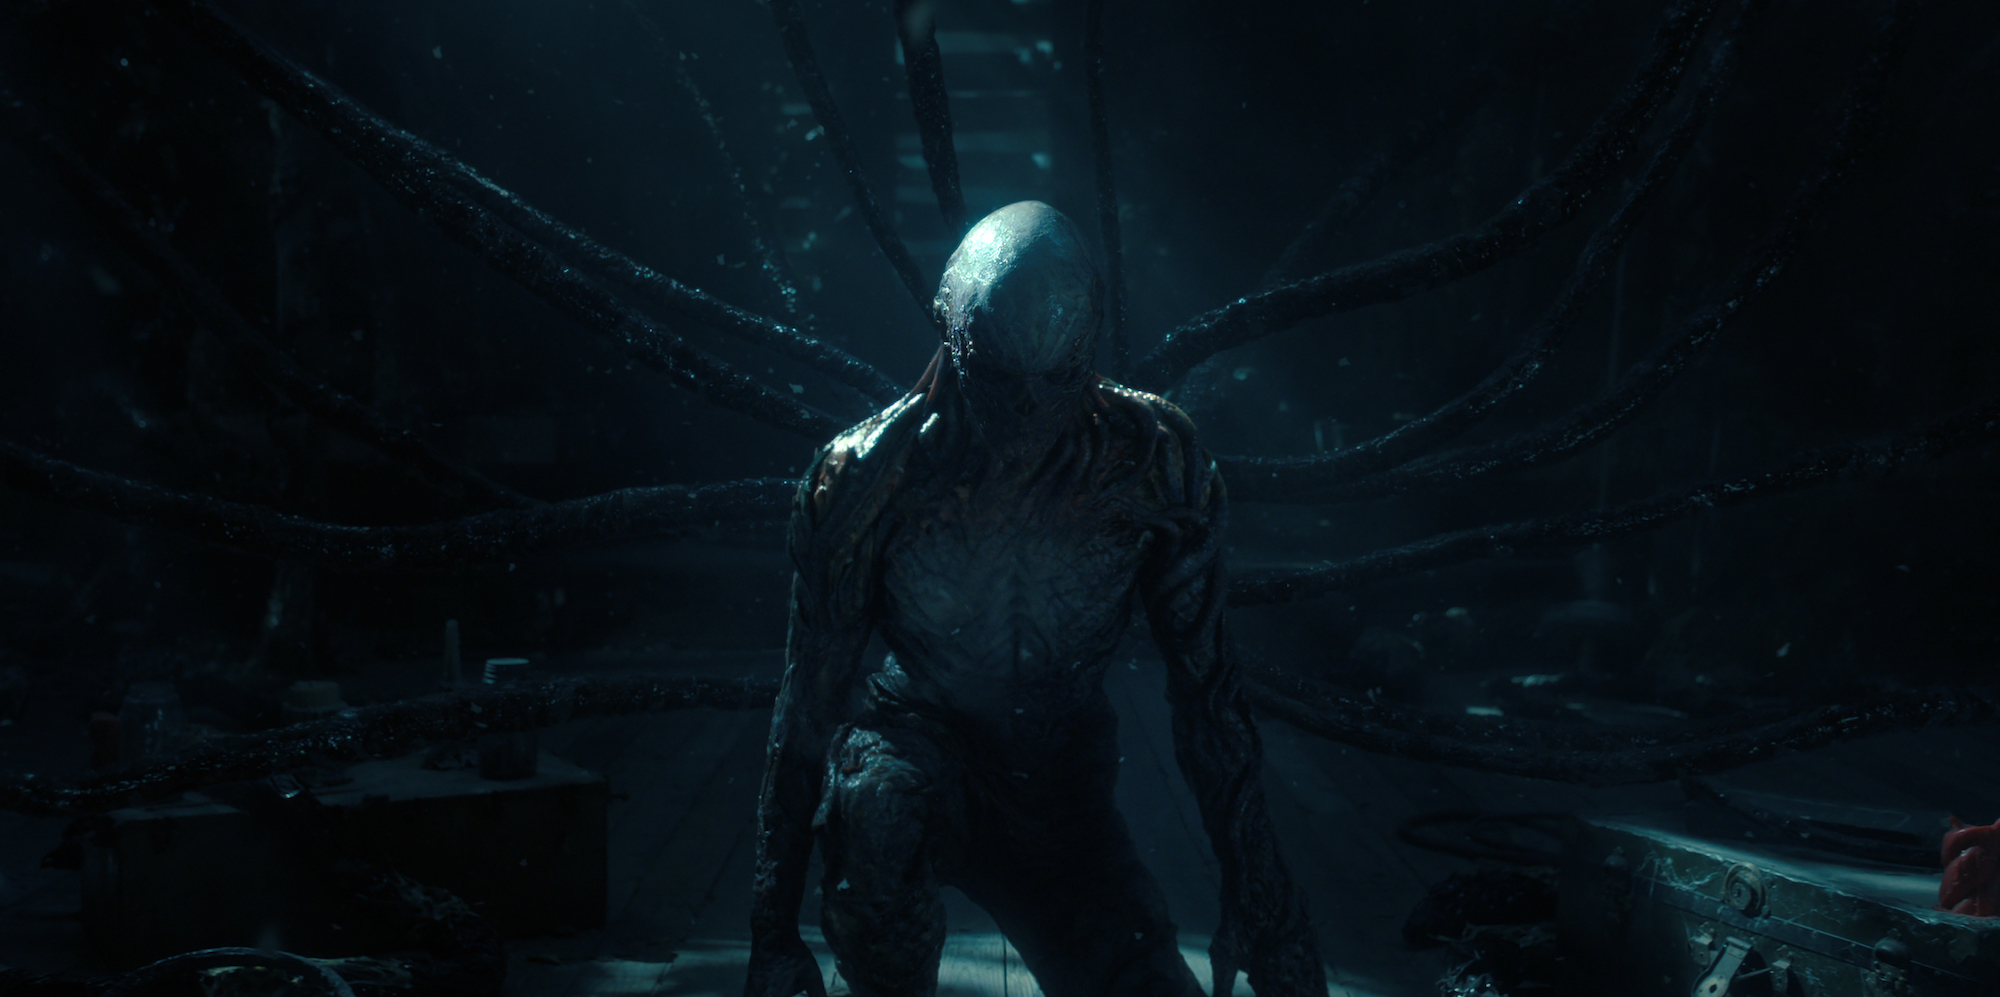 'Stranger Things 4' villain Vecna, seen here, was inspired by horror movie monsters from their childhood.